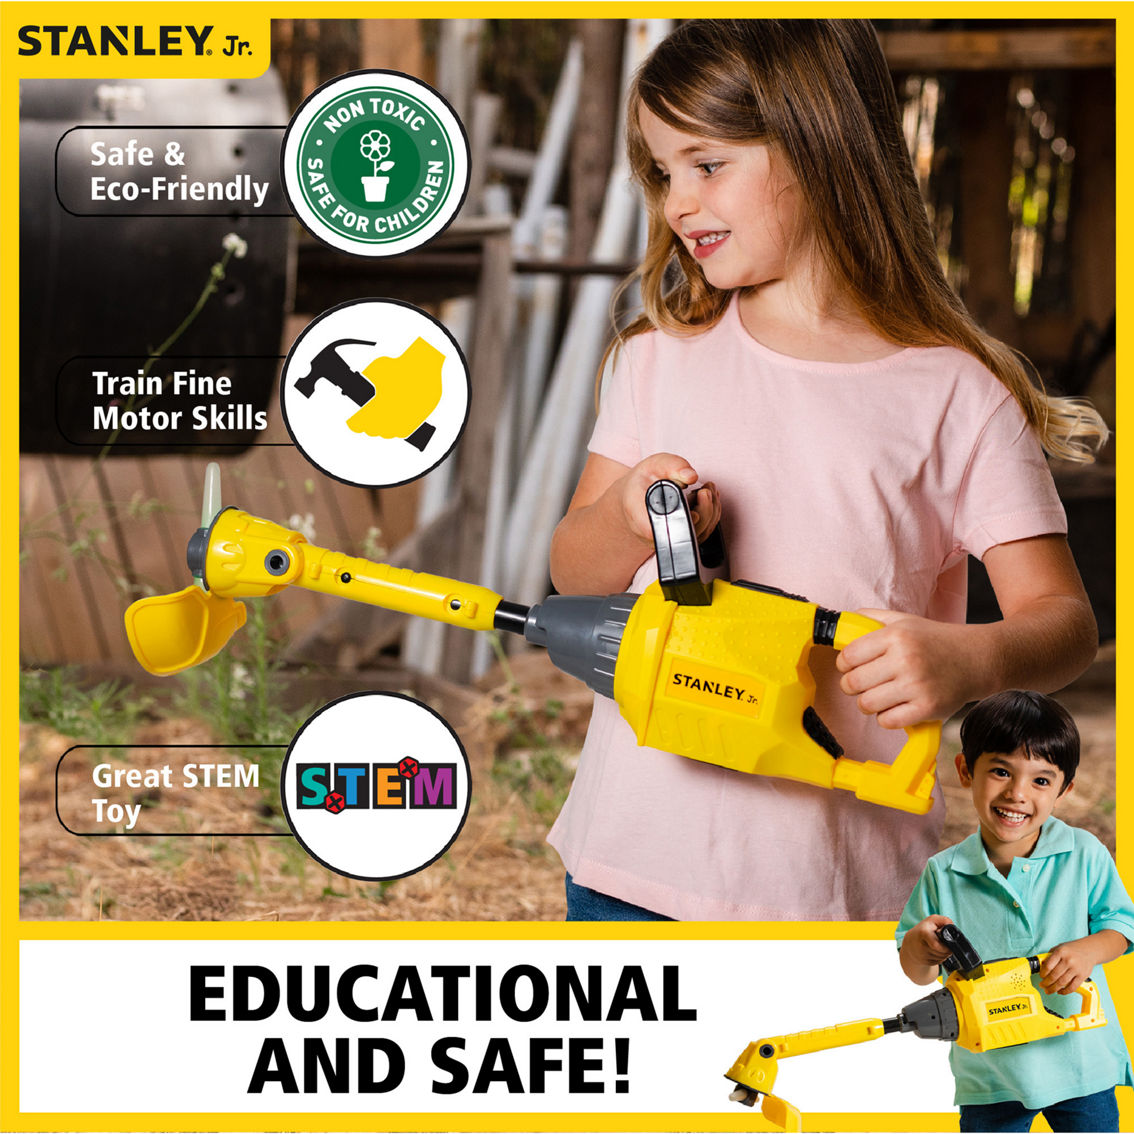 ​Stanley Jr. Battery Operated Toy Weed Trimmer - Image 4 of 5